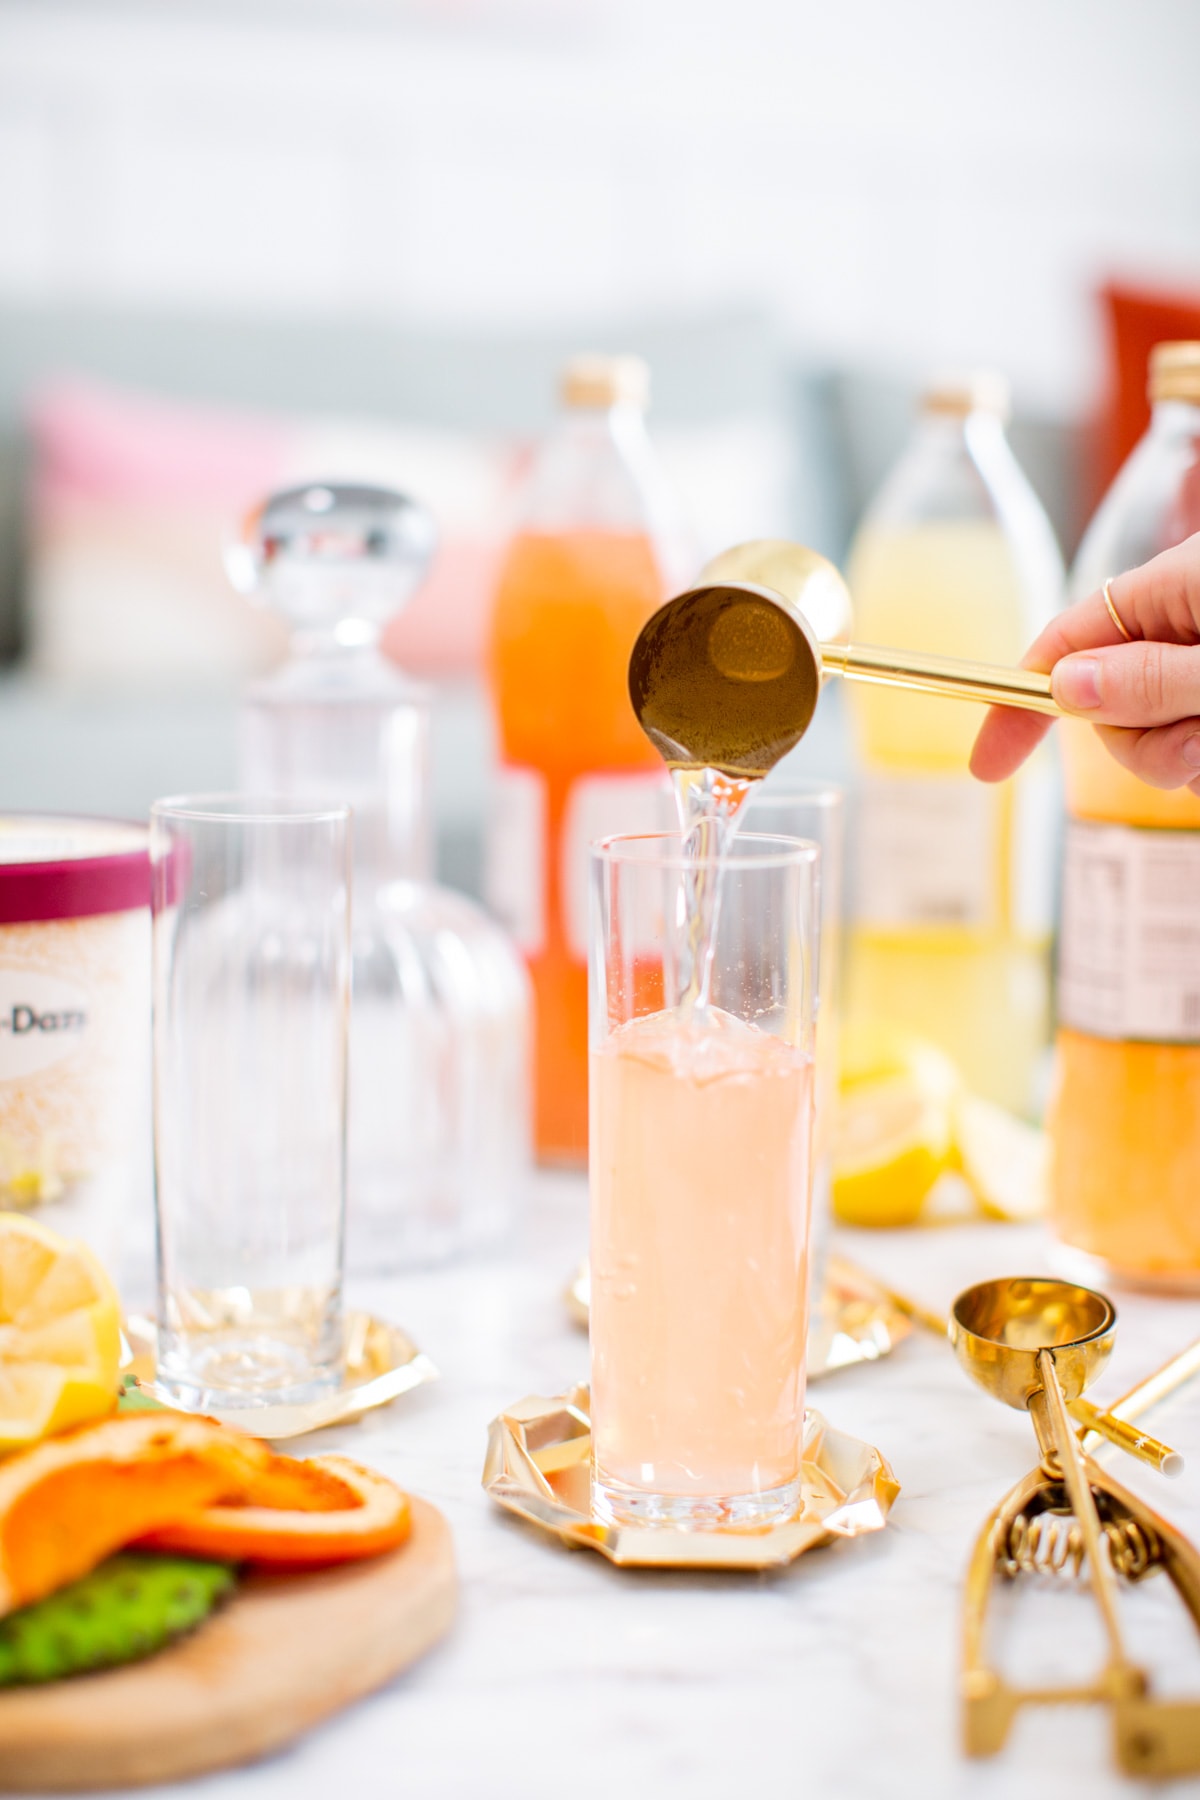 3 Sparkling Ice Cream Cocktail Recipes by top Houston lifestyle blogger Ashley Rose of Sugar & Cloth #cocktails #entertaining #recipes #icecream